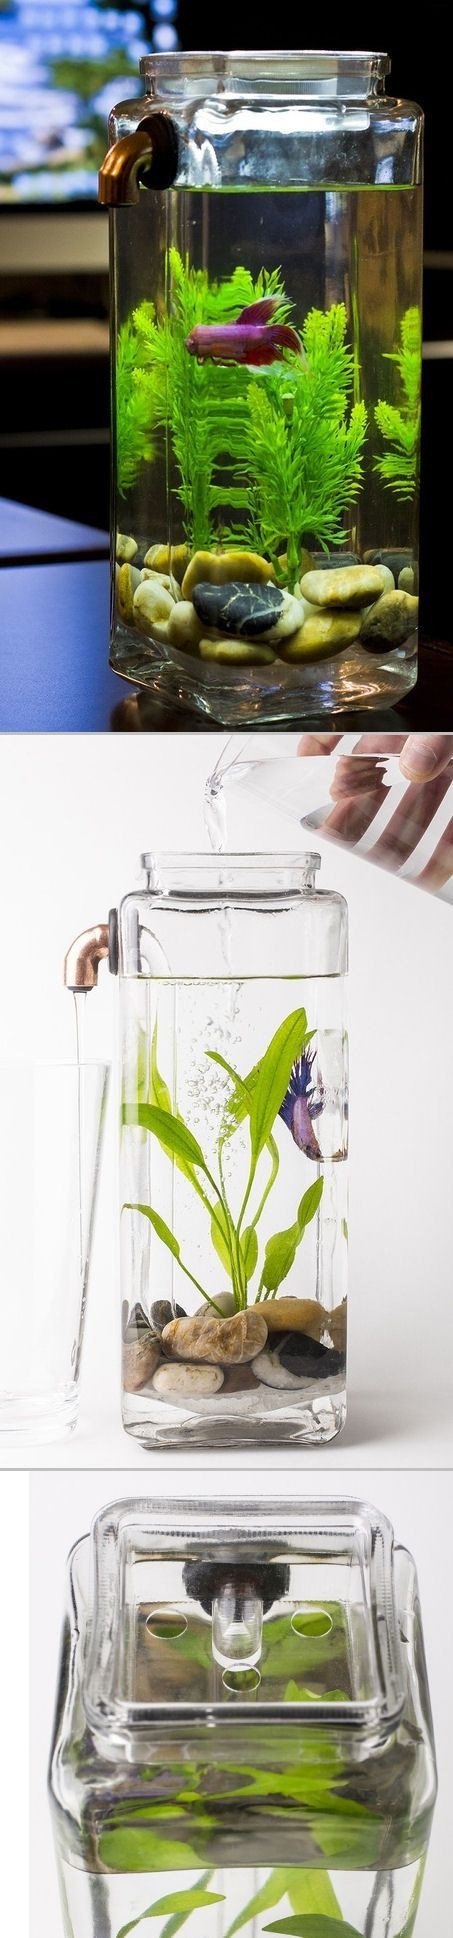 14 Fashionable Betta Vase Kit 2024 free download betta vase kit of 28 best fish bowl ideas images on pinterest fish tanks pisces and regarding self cleaning betta aquarium simply pour fresh water in and dirty water is